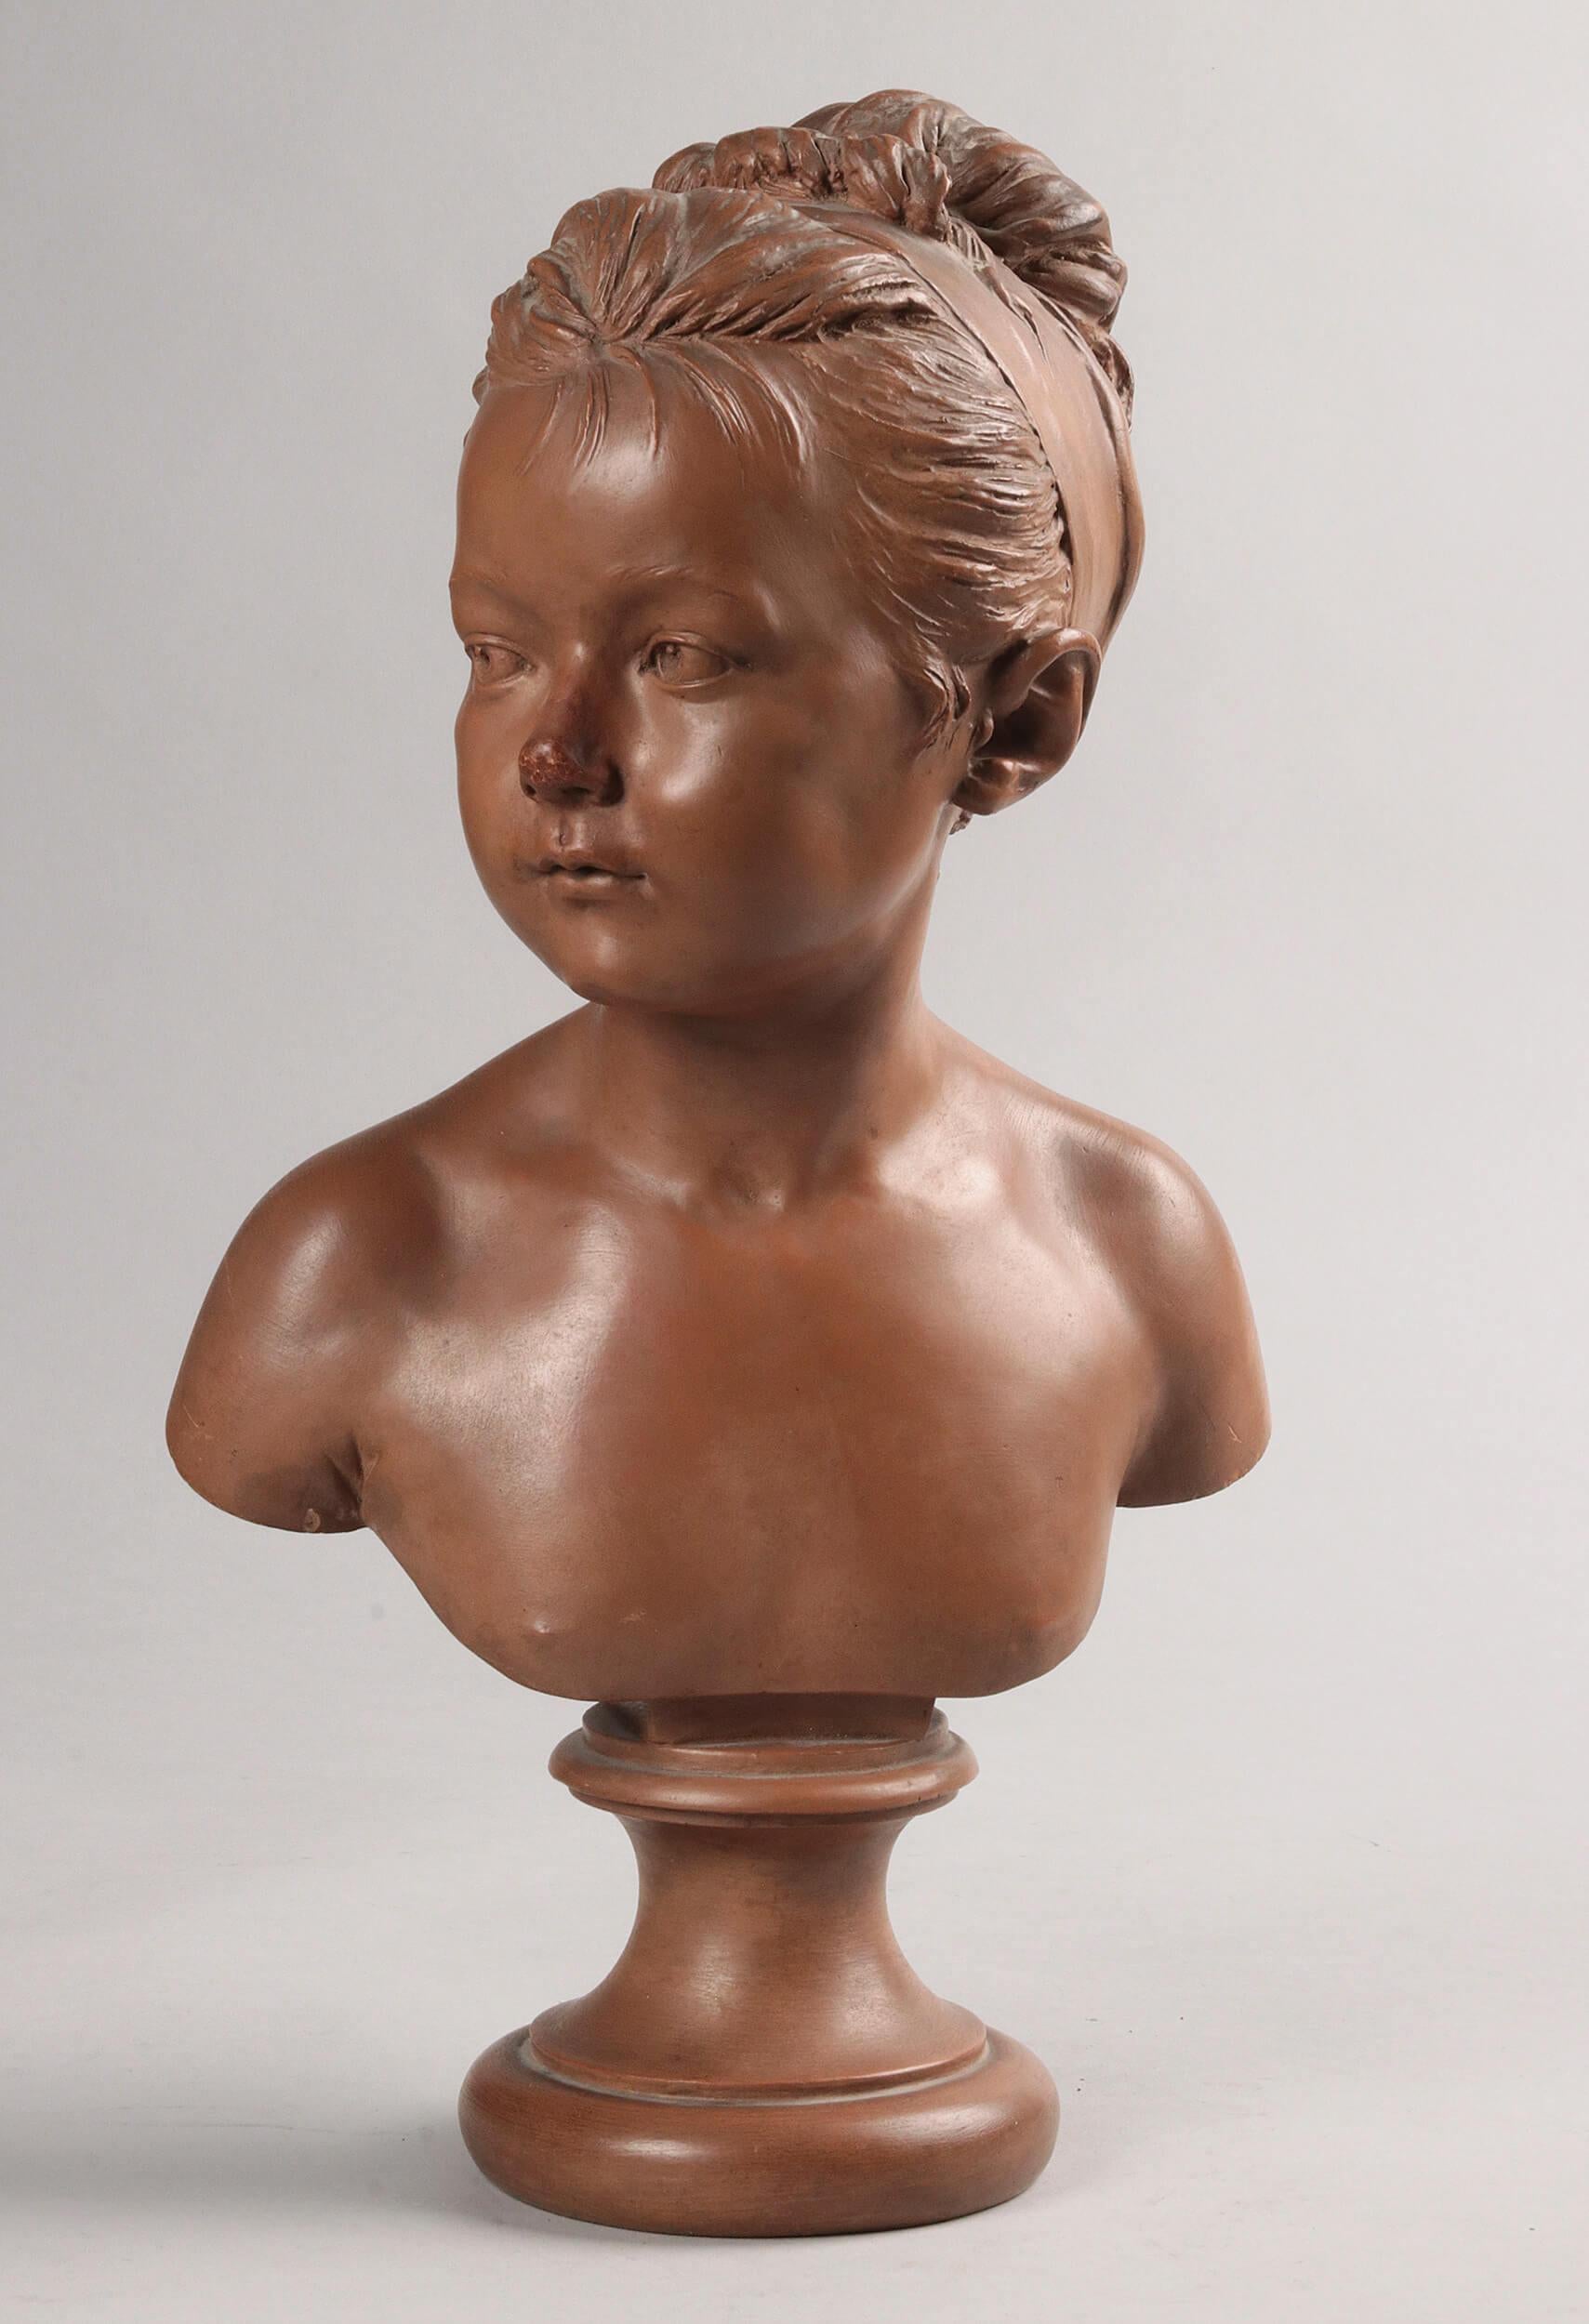 Handmade terracotta bust of a girl, signed by the artist K. Angel. This statue is made in France in the beginning of the 20th century, 1900-1910. The bust is in good condition, no cracks or restorations. It have a nice old patina. 

This bust in